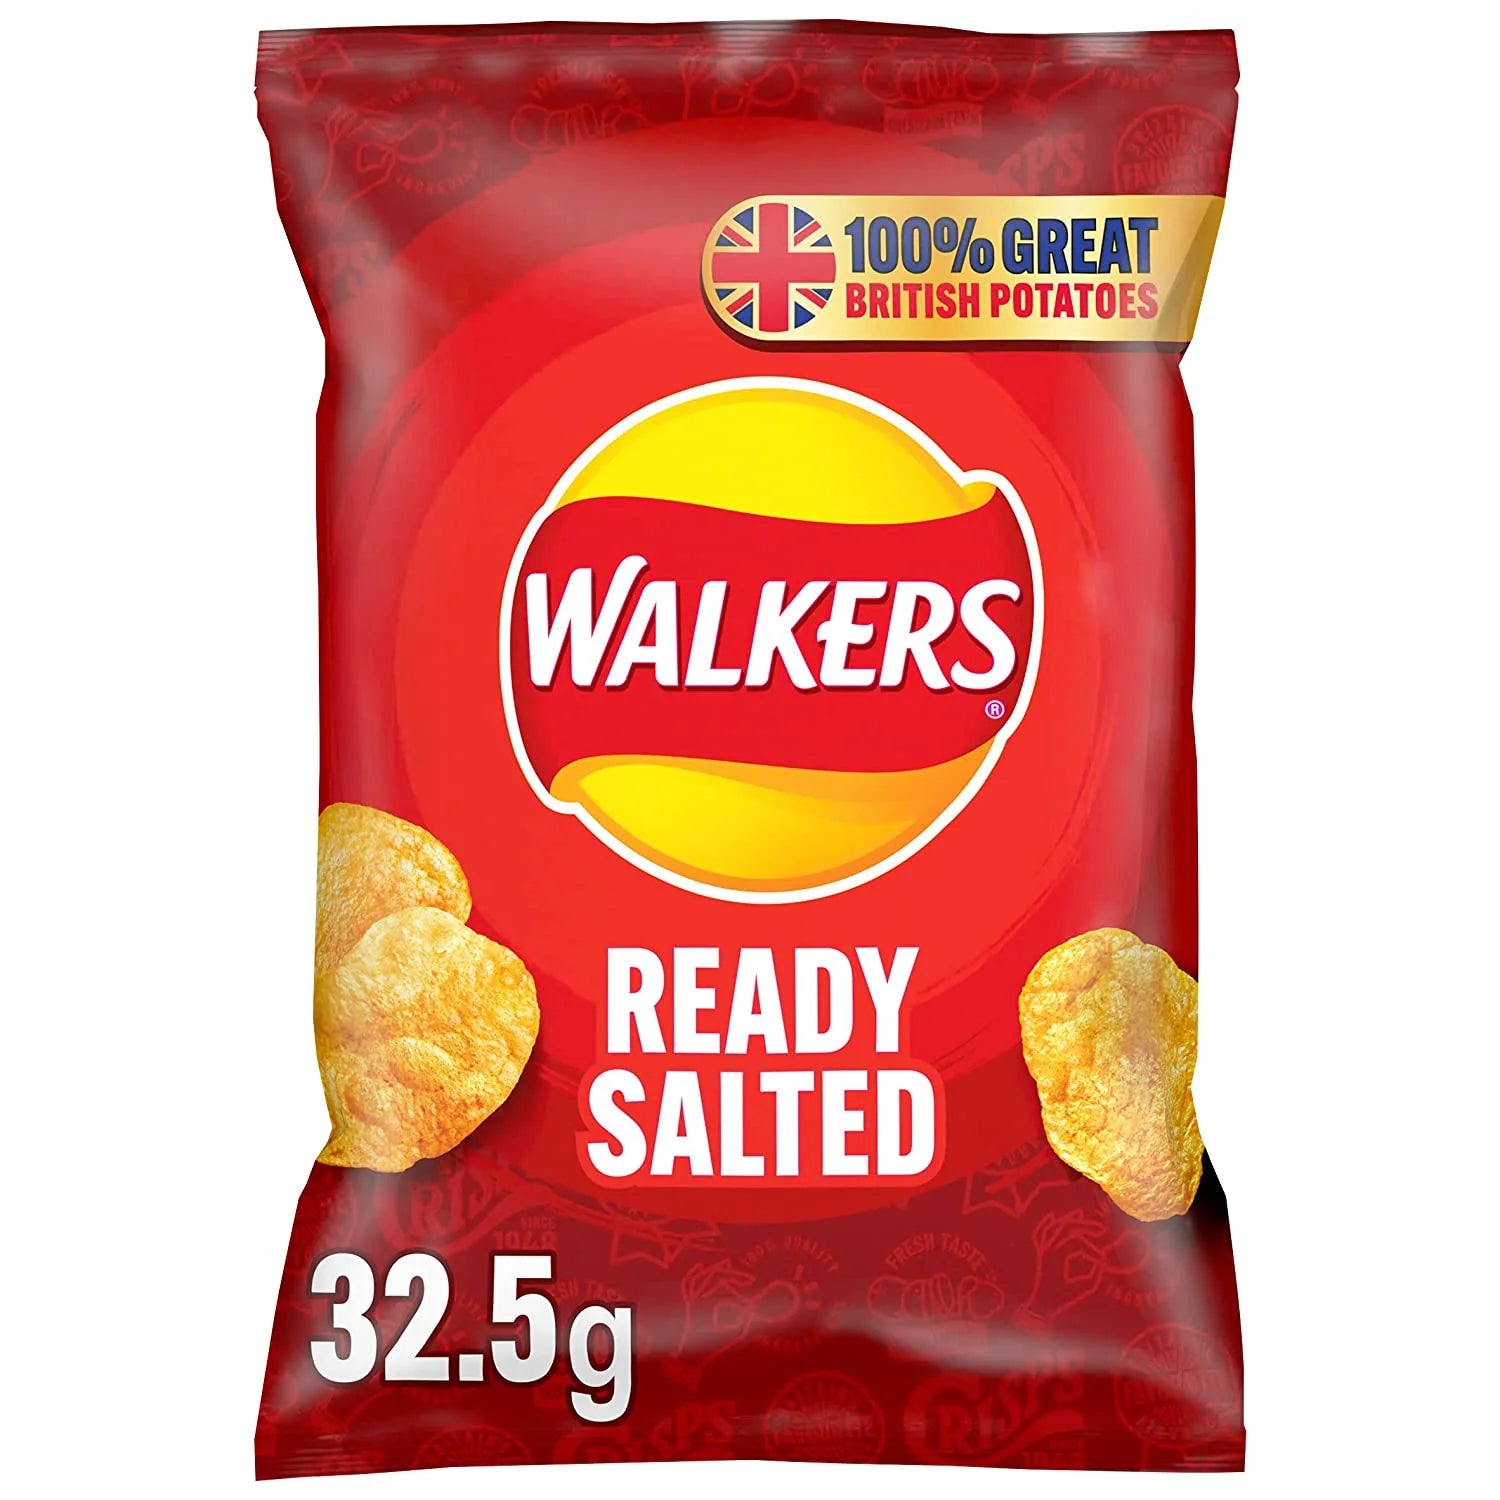 Walkers Ready Salted Crisps - 32.5g